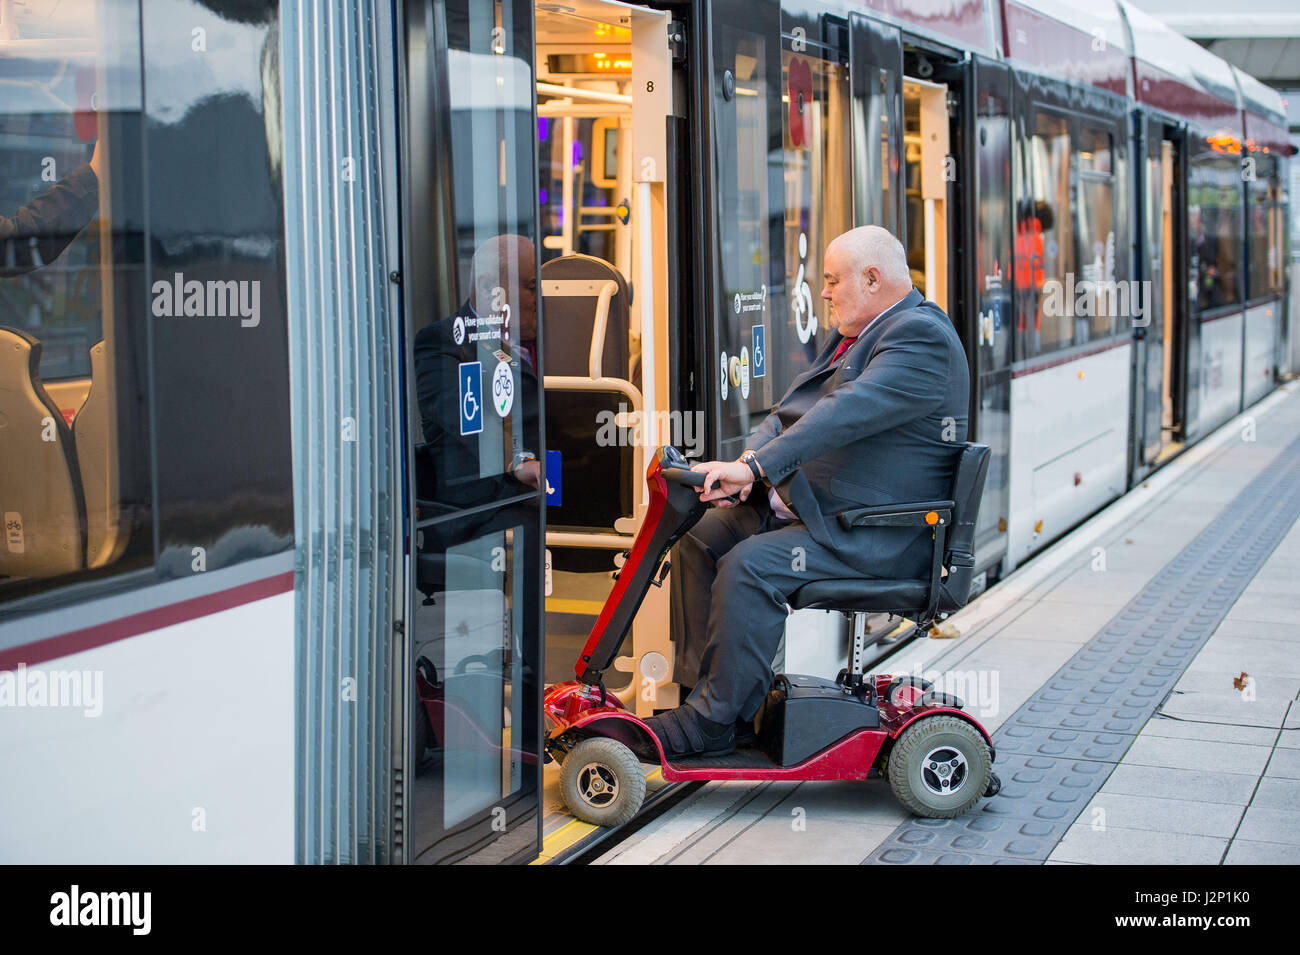 Transport for Edinburgh, Trams, Mobility Scooter, Disability, George Deeks Stock Photo